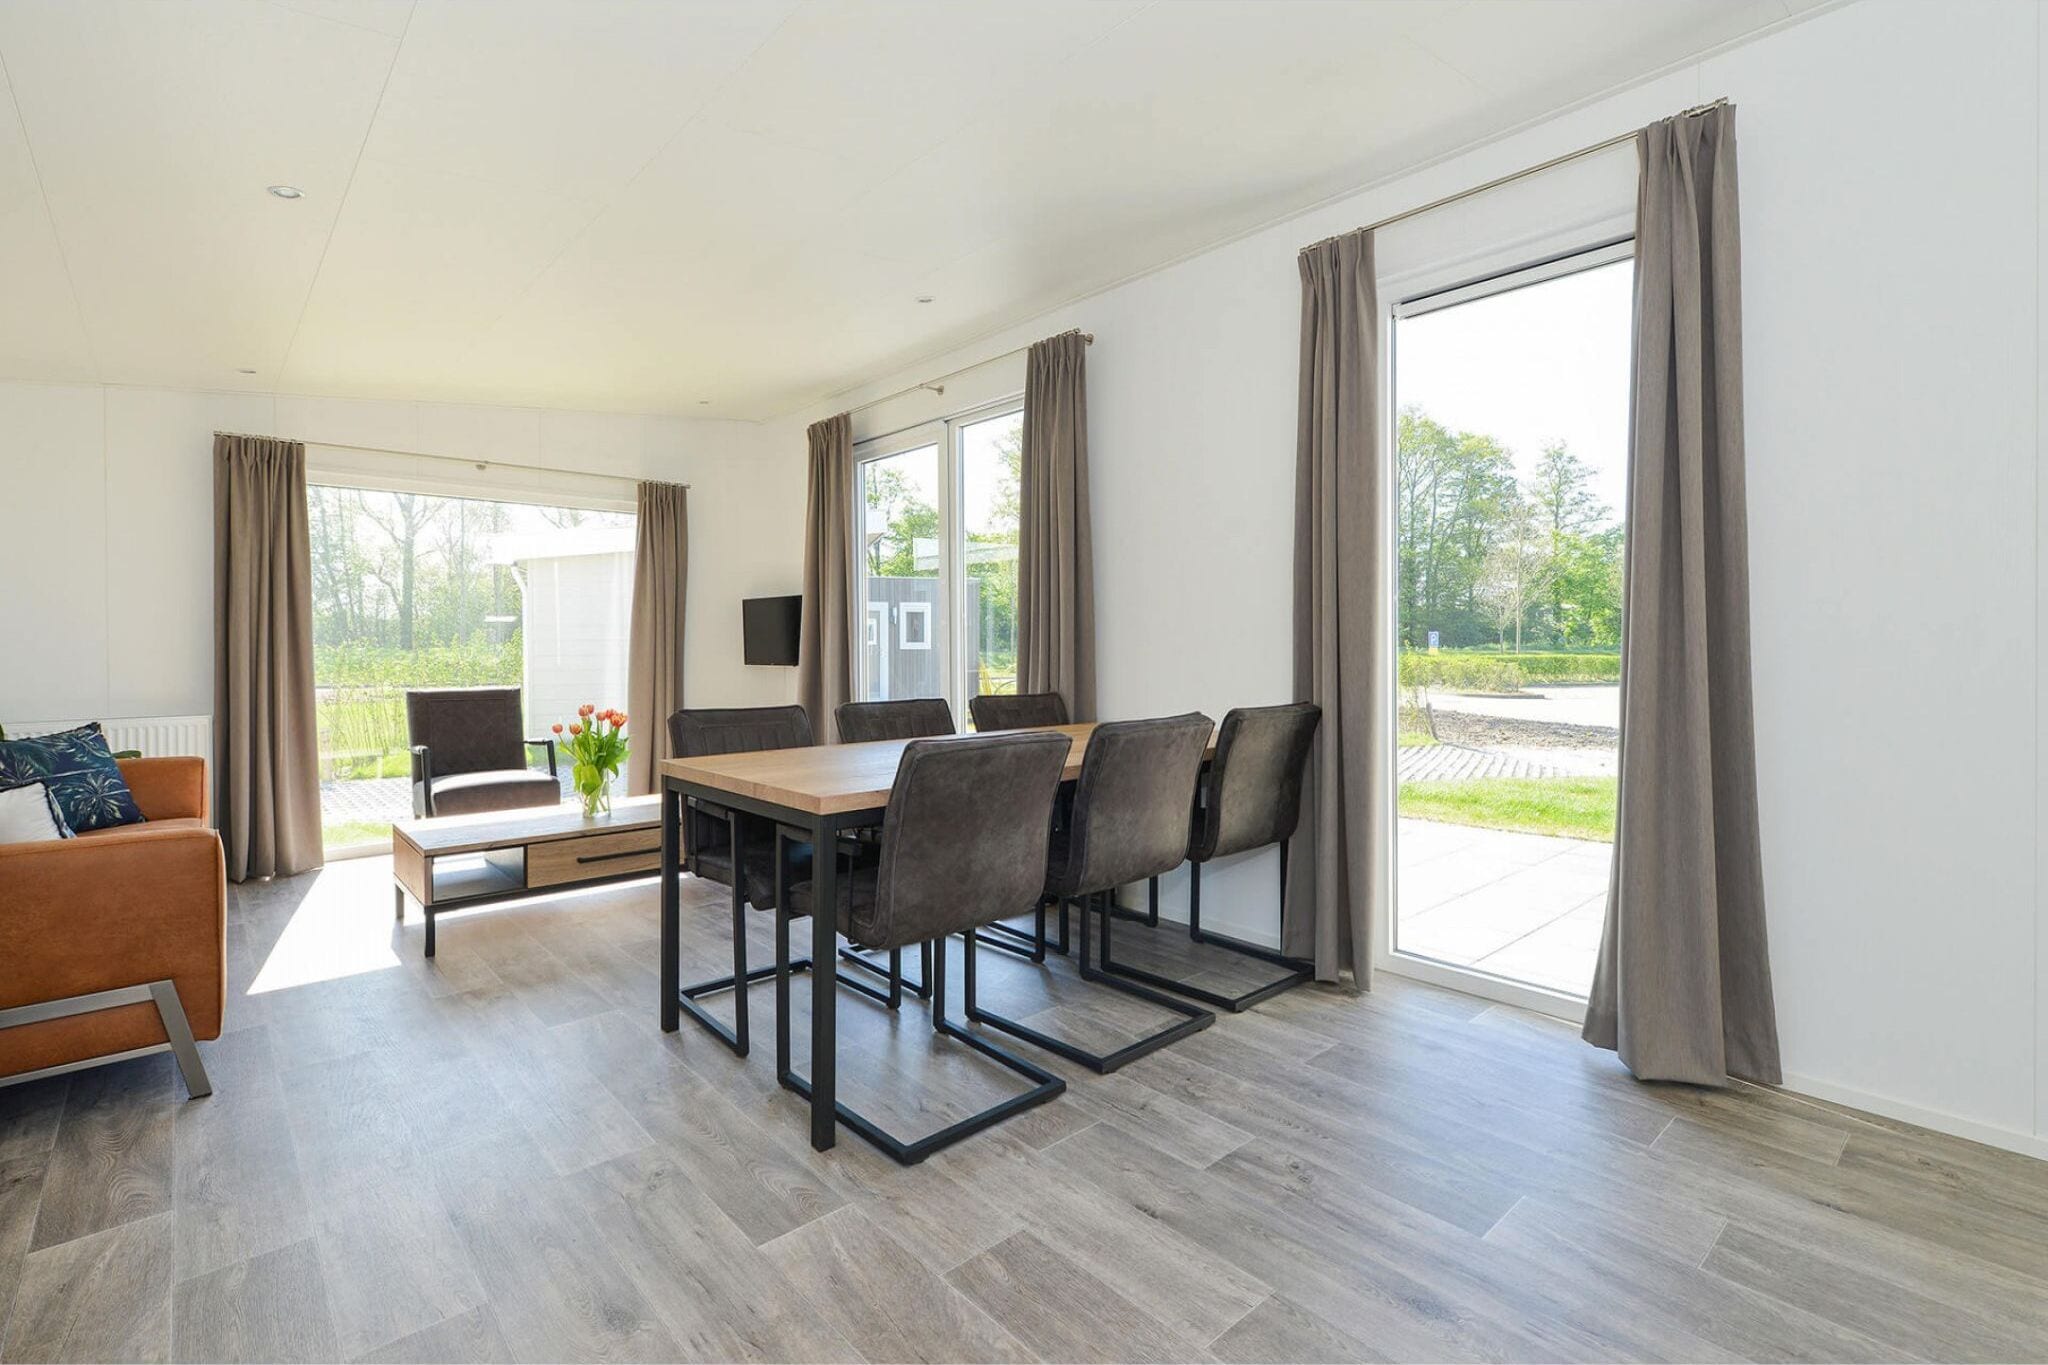 Brand new chalets at 10 minutes from the Oosterschelde